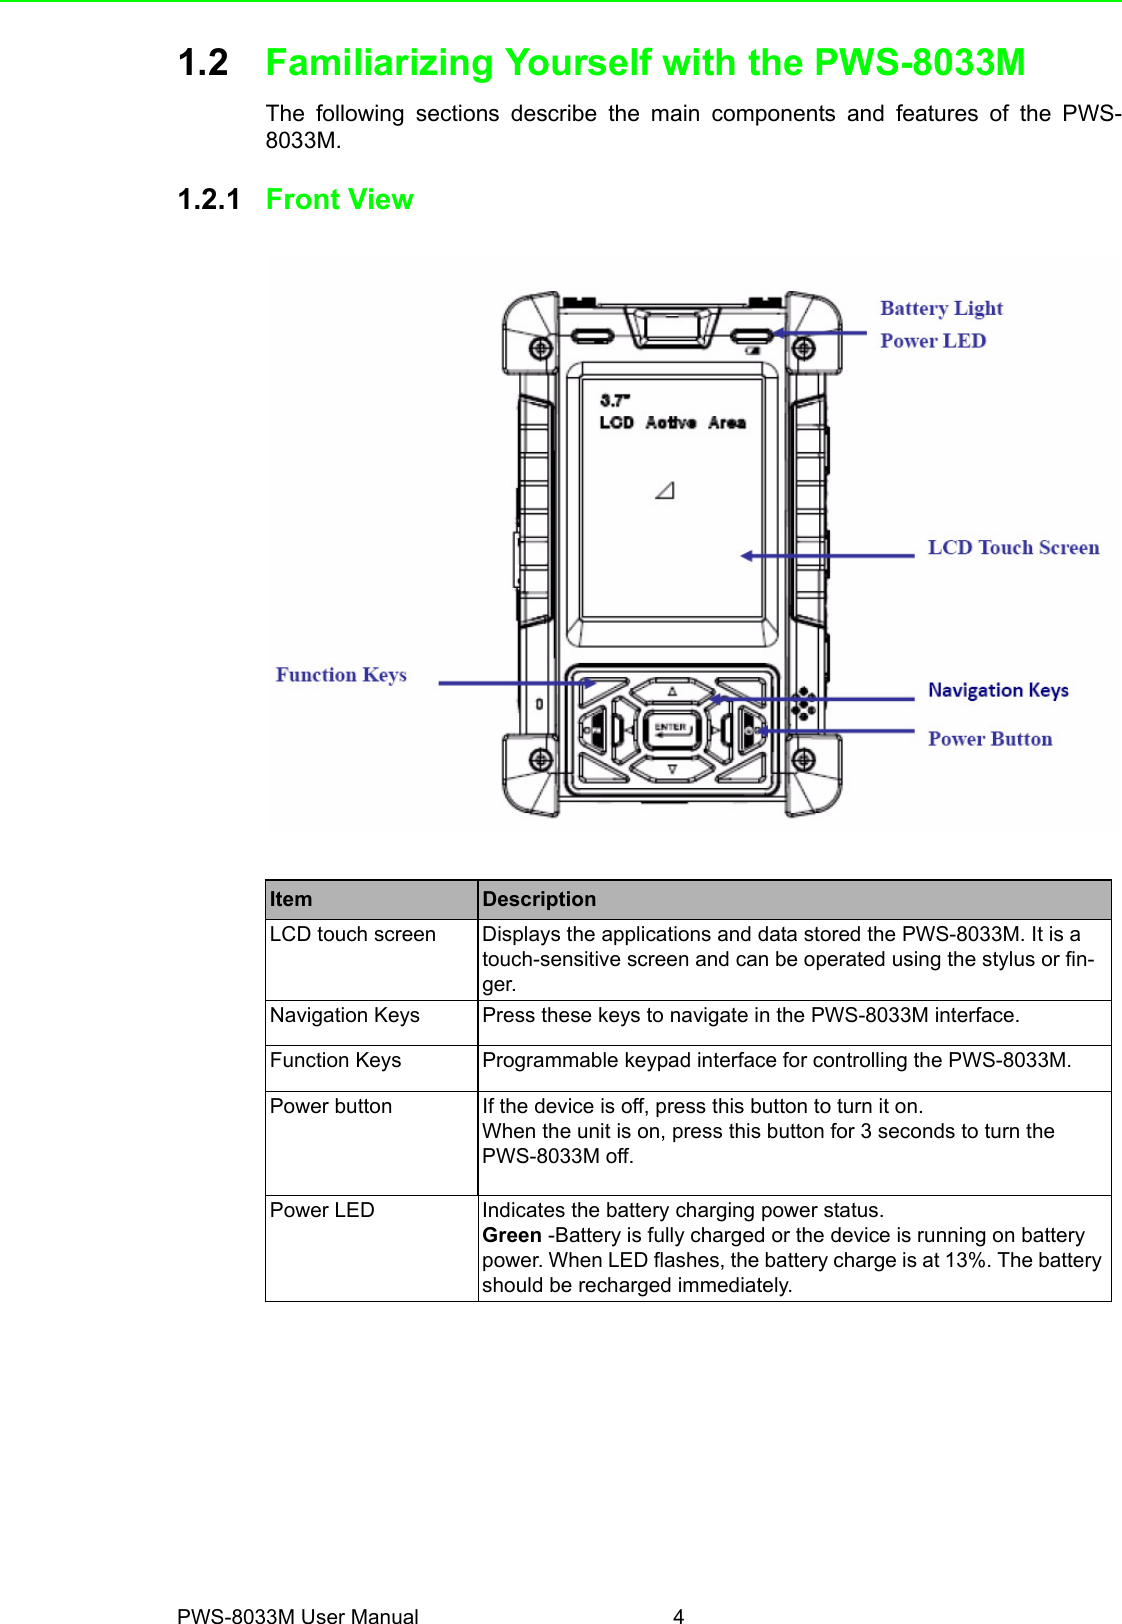 PWS-8033M User Manual 41.2 Familiarizing Yourself with the PWS-8033MThe following sections describe the main components and features of the PWS-8033M.1.2.1 Front ViewItem Description LCD touch screen  Displays the applications and data stored the PWS-8033M. It is a touch-sensitive screen and can be operated using the stylus or fin-ger.Navigation Keys  Press these keys to navigate in the PWS-8033M interface. Function Keys  Programmable keypad interface for controlling the PWS-8033M.Power button  If the device is off, press this button to turn it on. When the unit is on, press this button for 3 seconds to turn the PWS-8033M off. Power LED  Indicates the battery charging power status. Green -Battery is fully charged or the device is running on battery power. When LED flashes, the battery charge is at 13%. The battery should be recharged immediately.